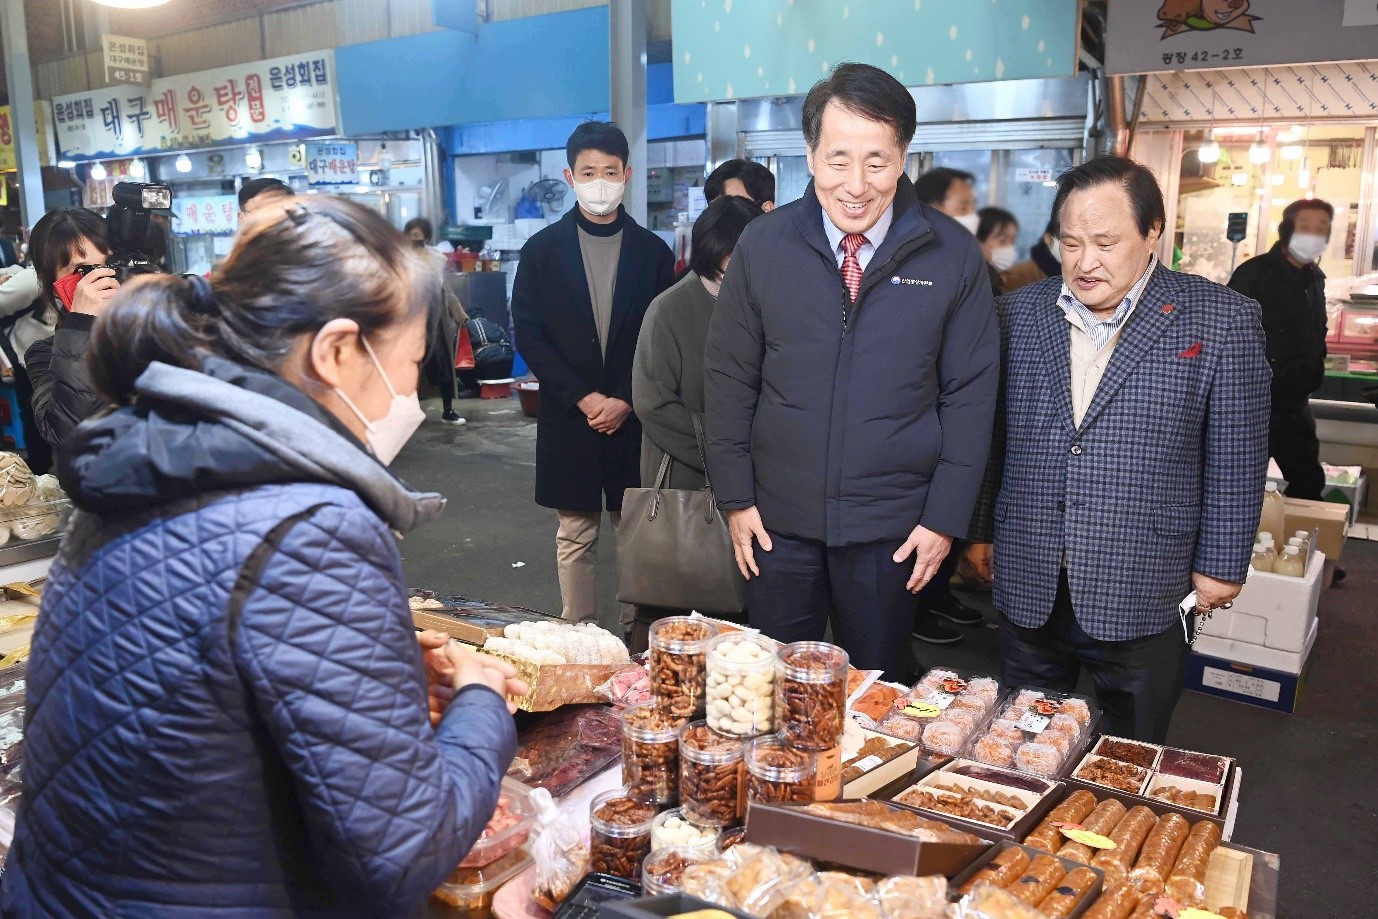 1st Vice Minister visits market ahead of Korea's Lunar New Year holidays Image 0